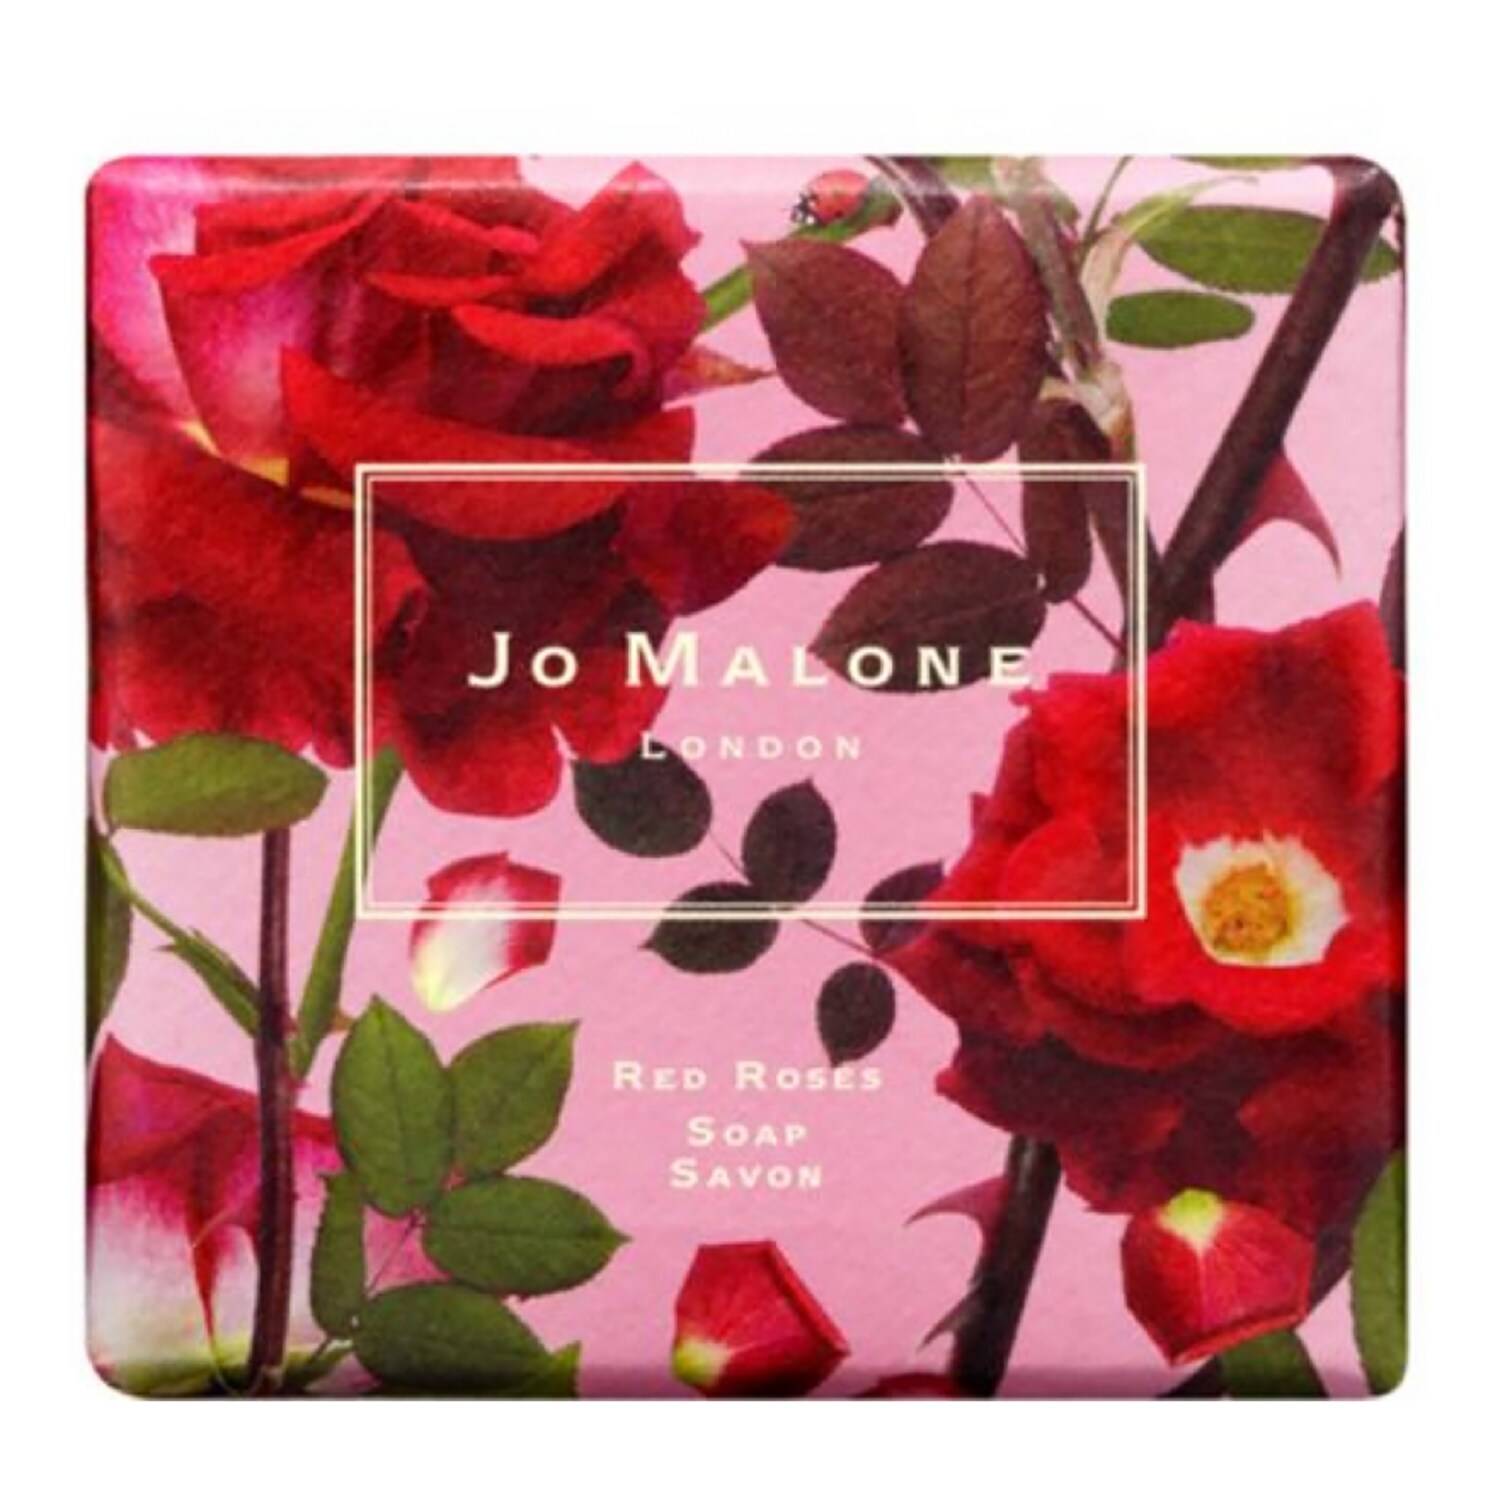 Jo Malone London Red Roses Soap 100G - 2022